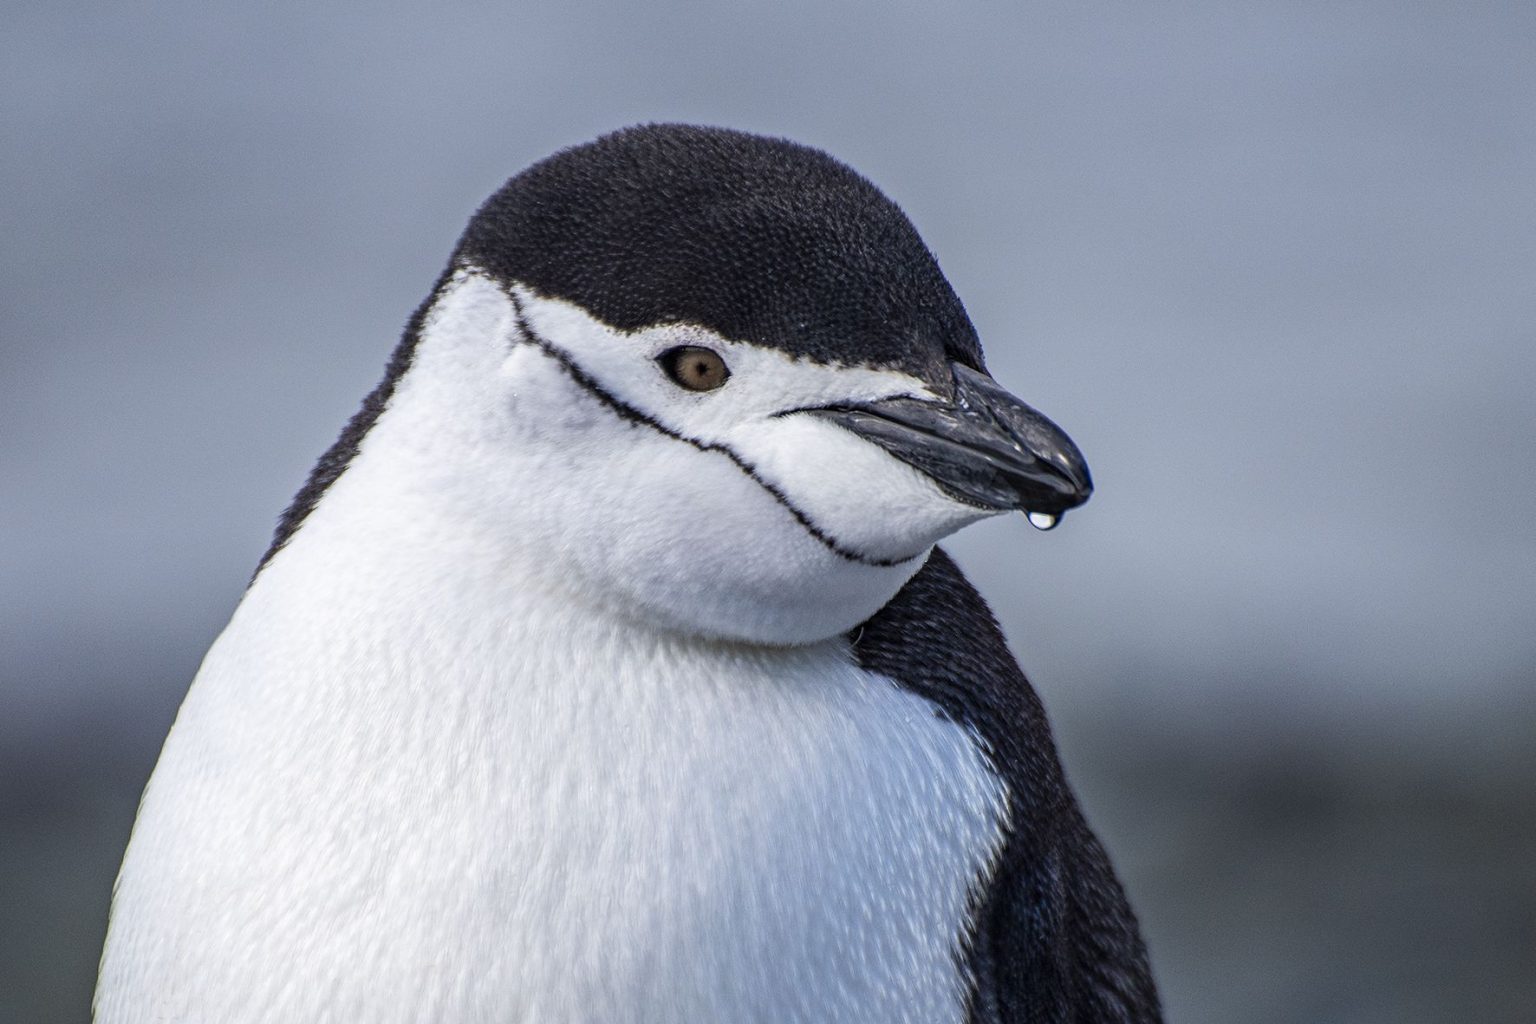 The Chinstrap Penguin